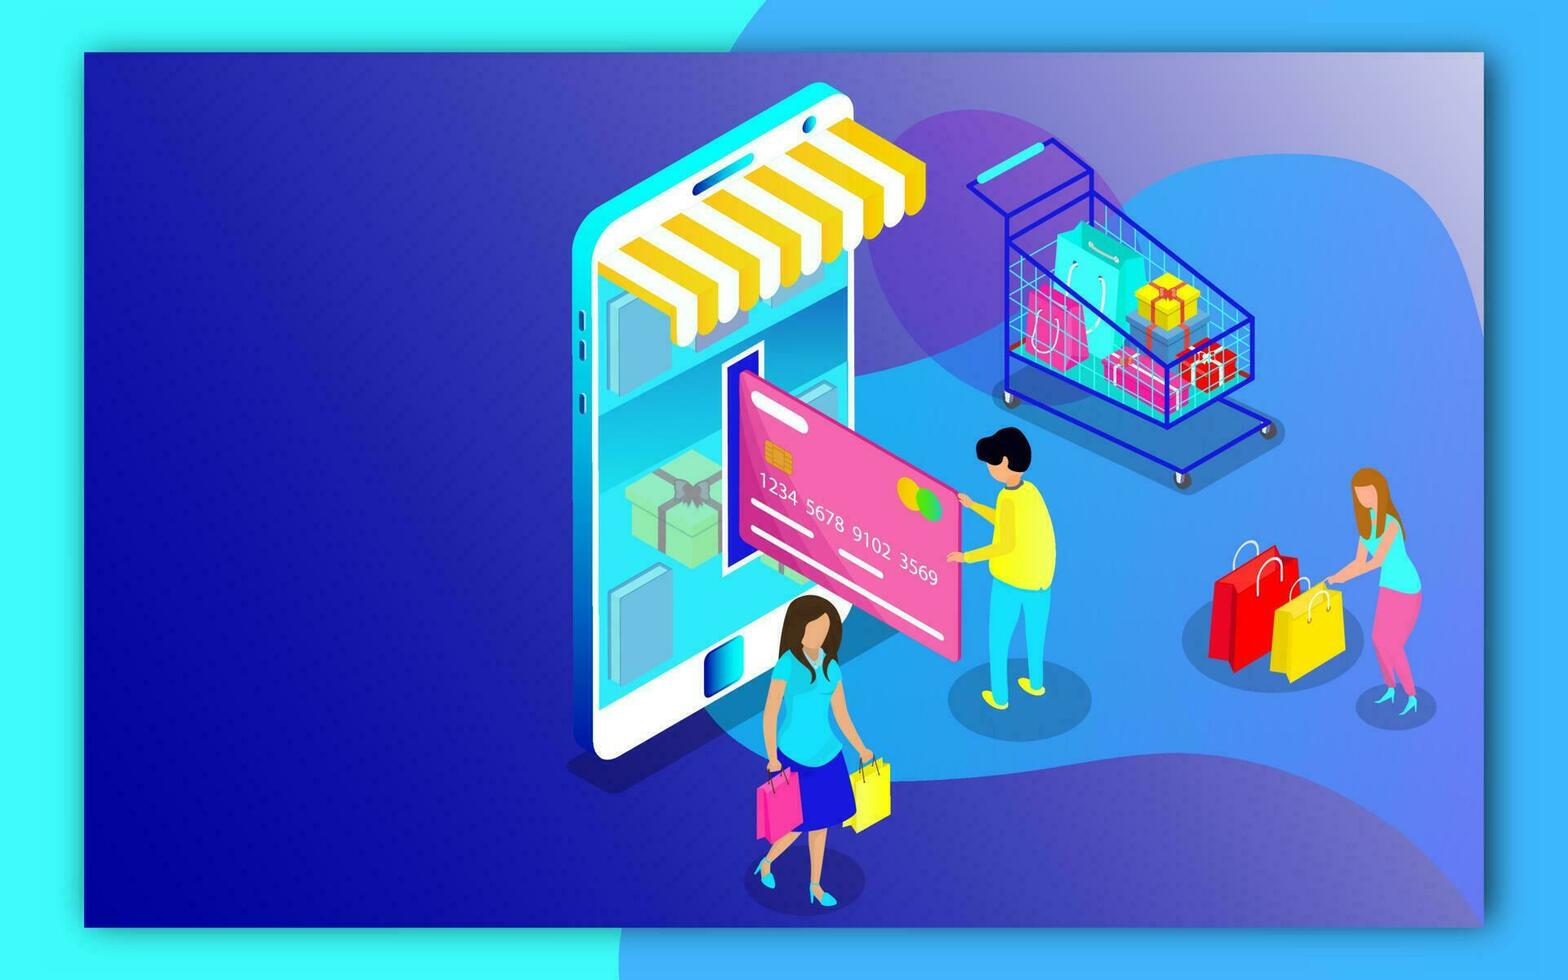 3D illustration of user online shopping and payment by mobile shop with shopping cart on abstract background. vector